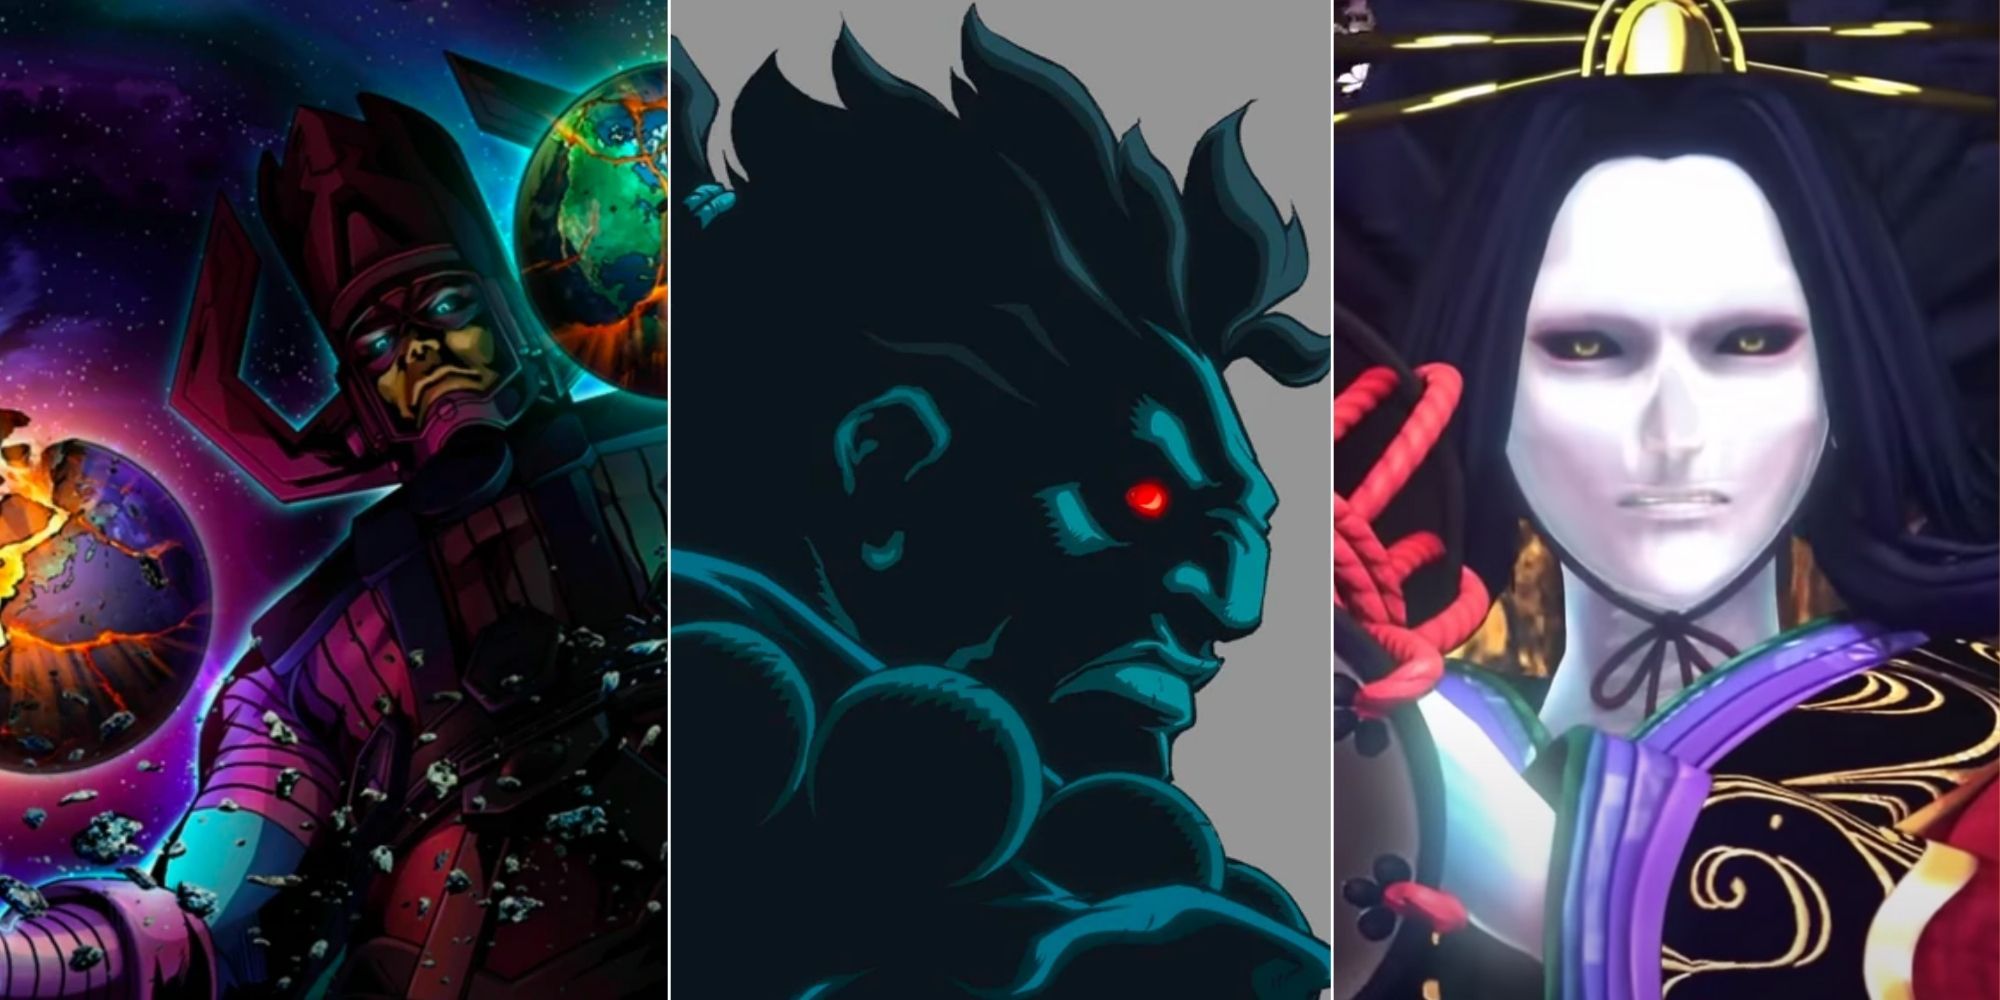 Fighting Game Boss Characters We Wish We Could Unlock - Feature Image